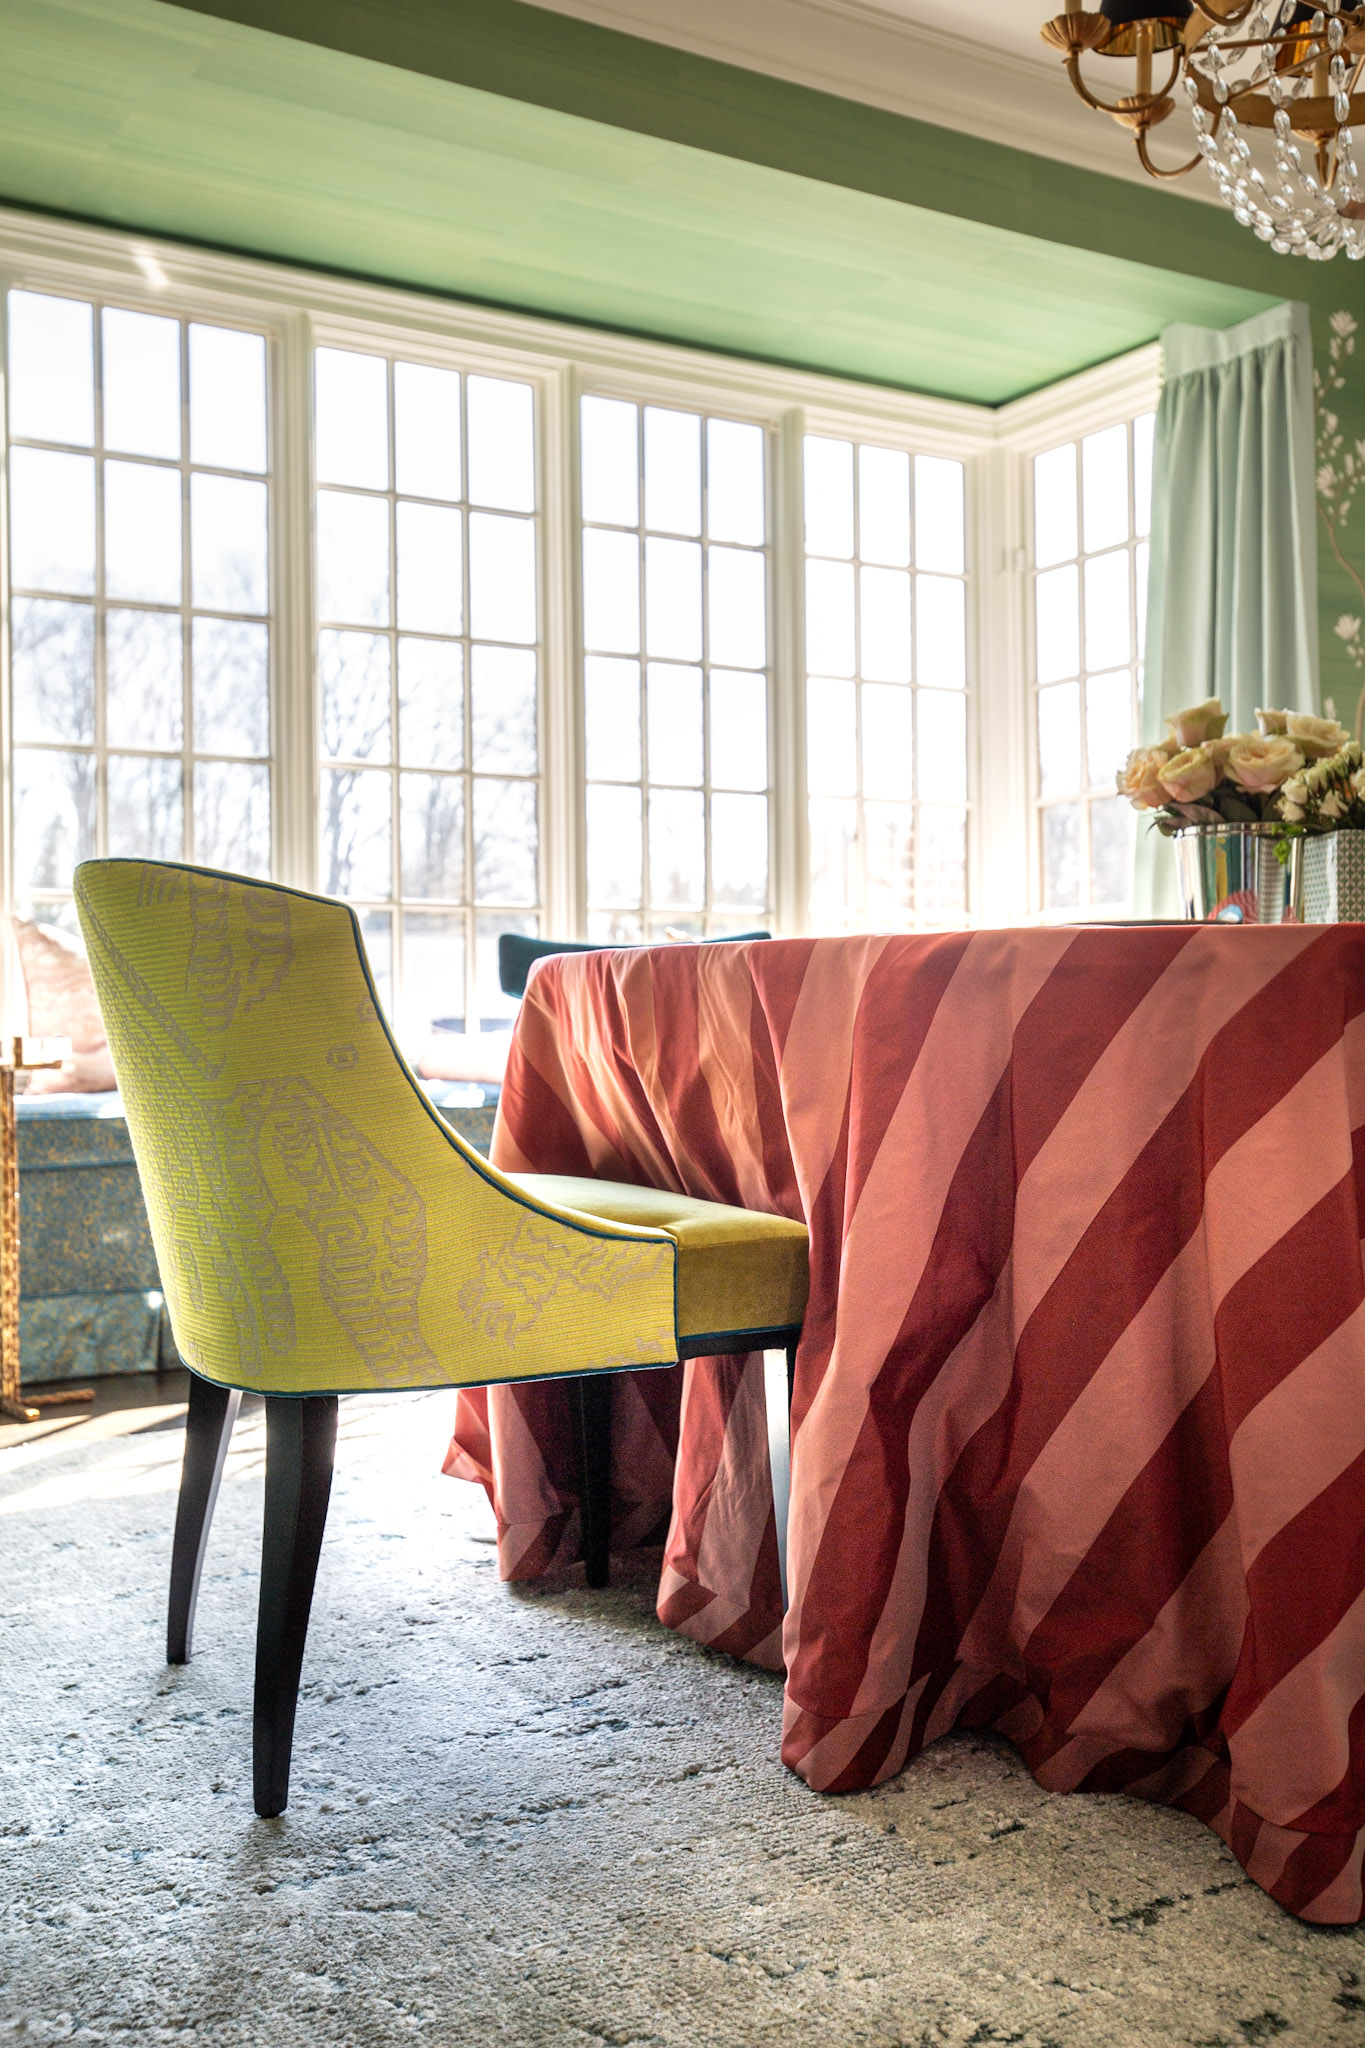 Century chair with Holly Hunt fabric, silk striped table cloth, Gracie wallpaper